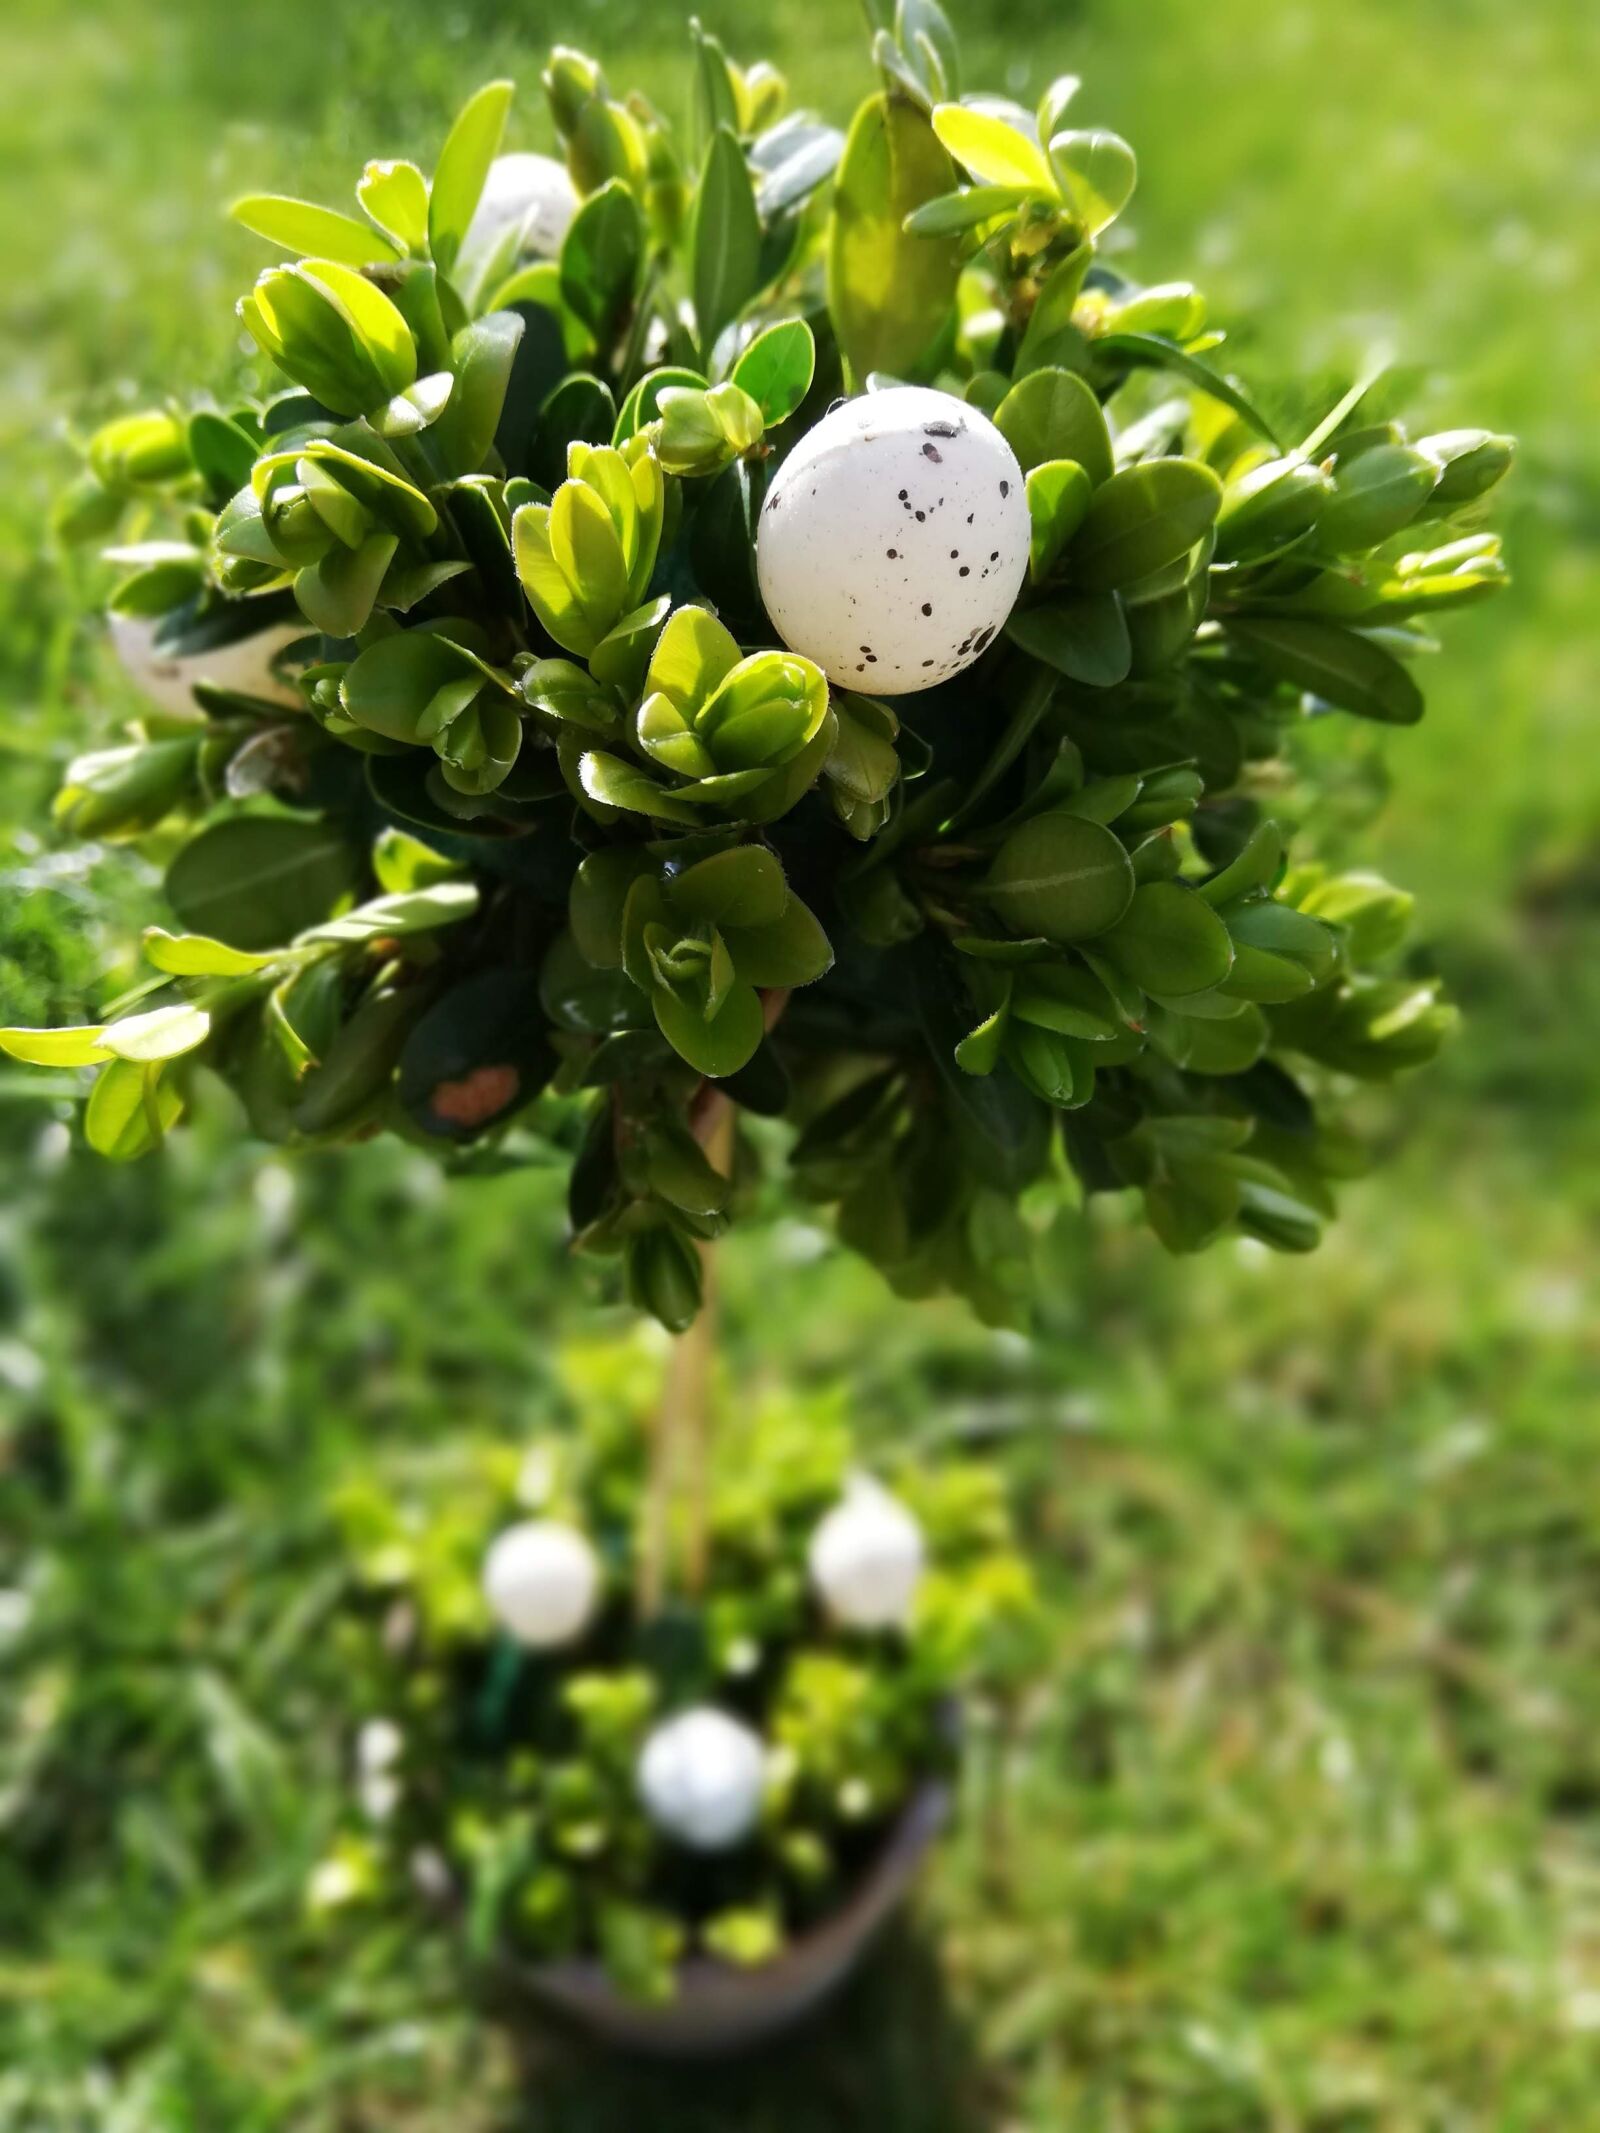 HUAWEI P20 lite sample photo. Palm sunday, egg, easter photography